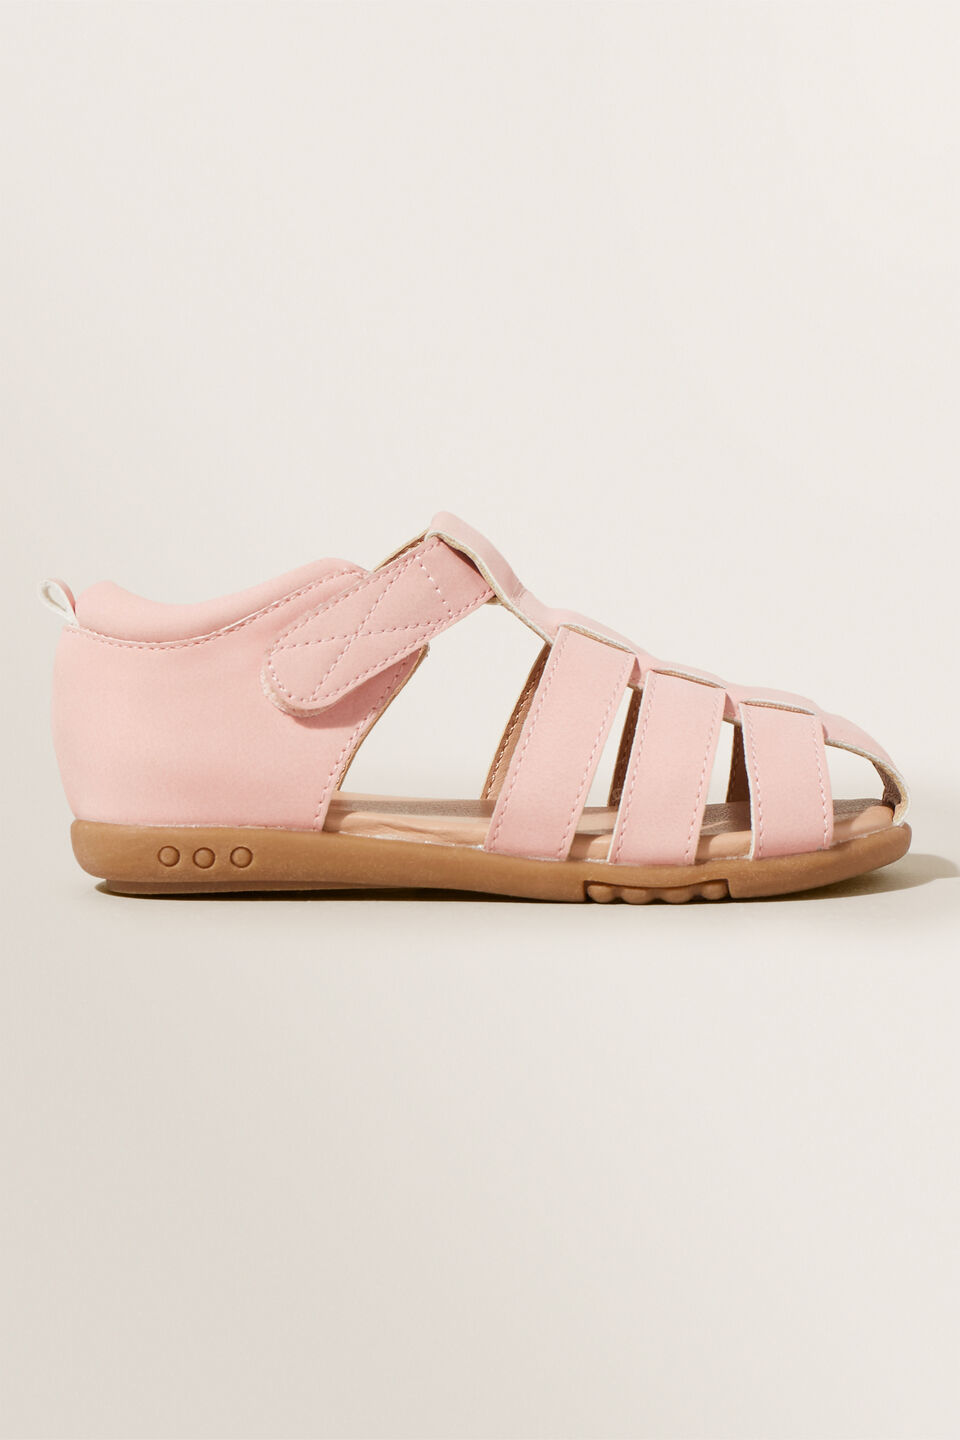 Cage Sandal  Dusty Rose